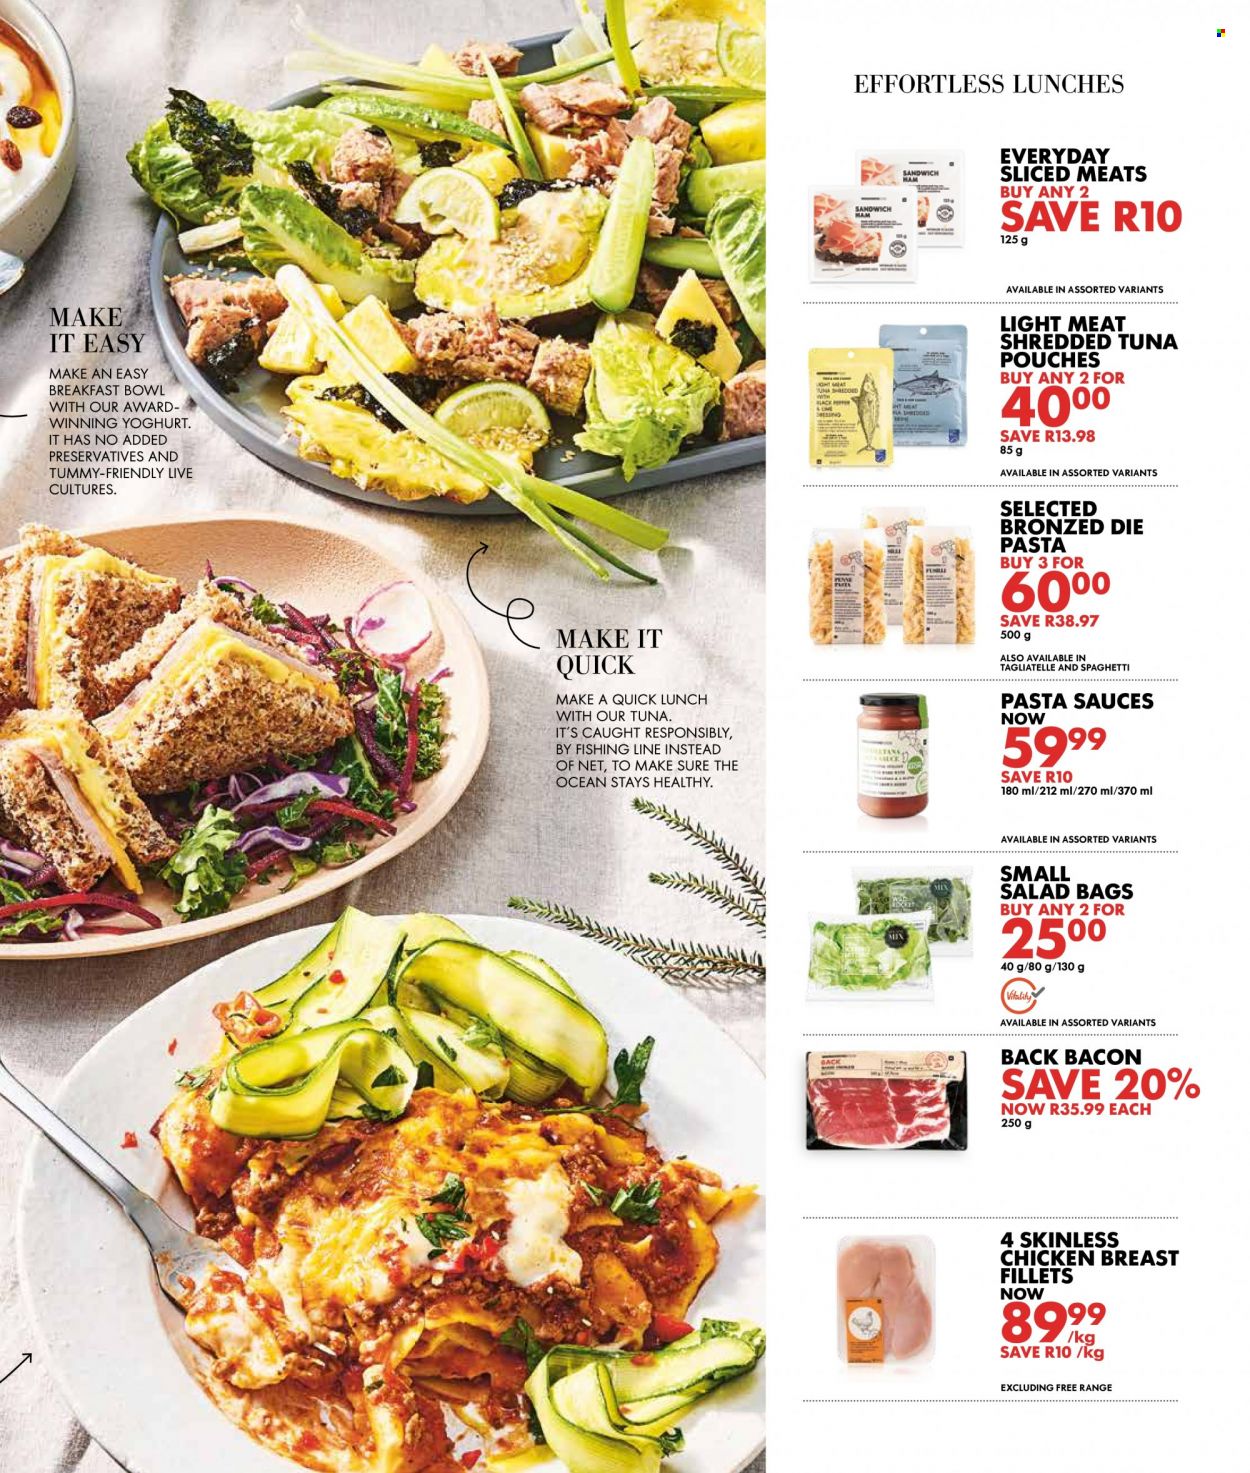 Woolworths specials - 01.10.2022 - 01.23.2022. 